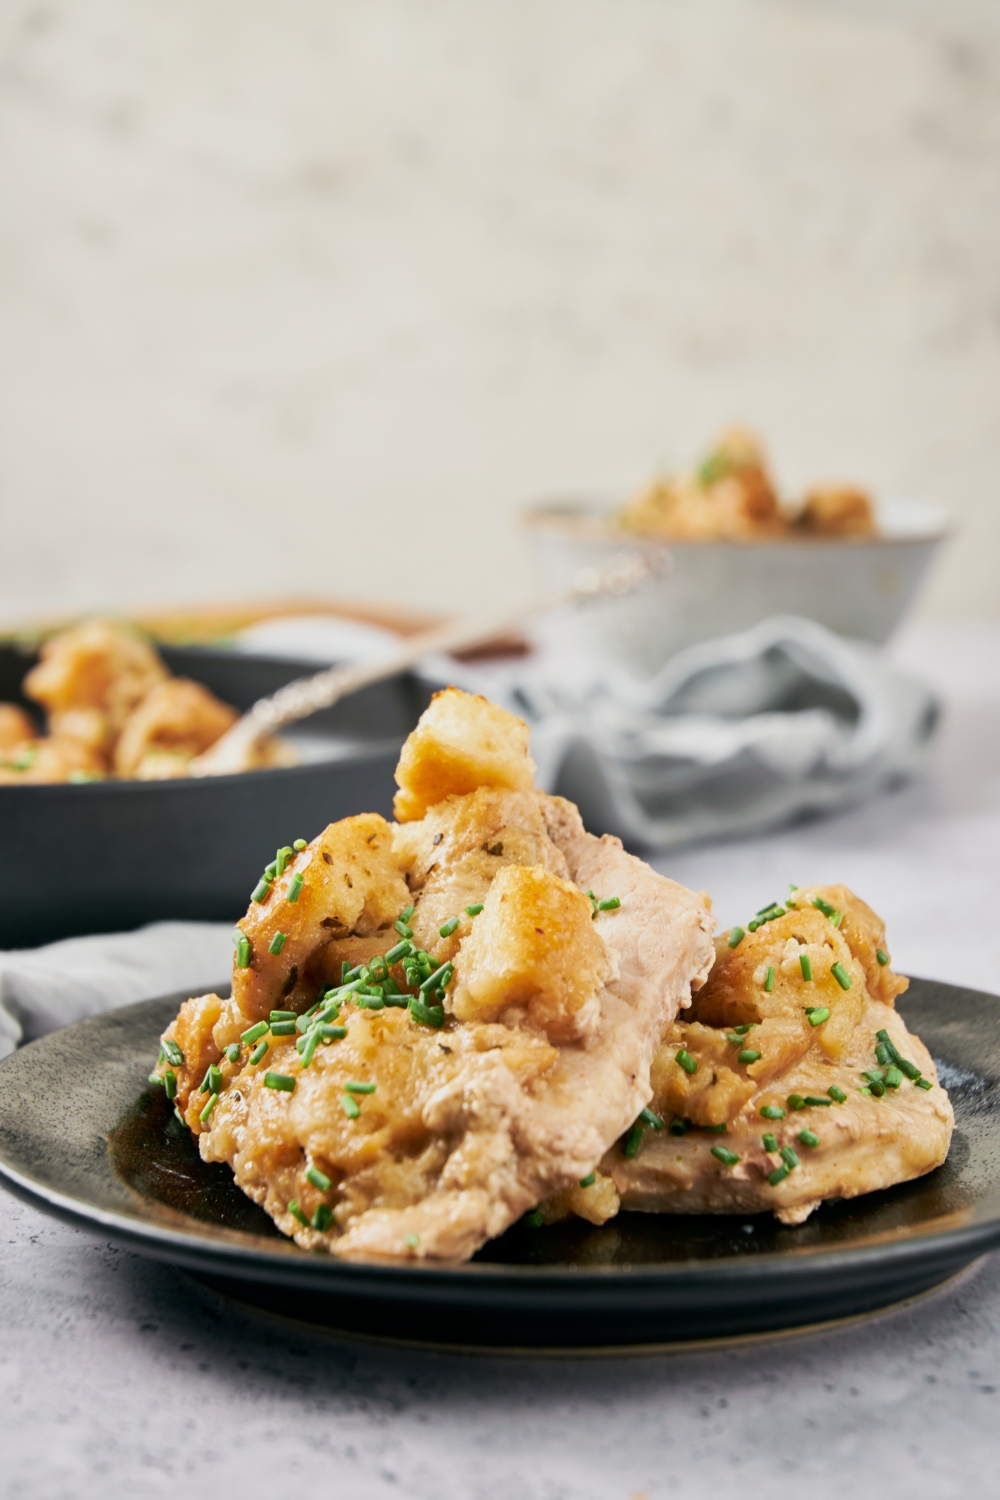 Two pork chops stacked on each other and each is covered in a creamy sauce with stuffing and a garnish of chopped chives.